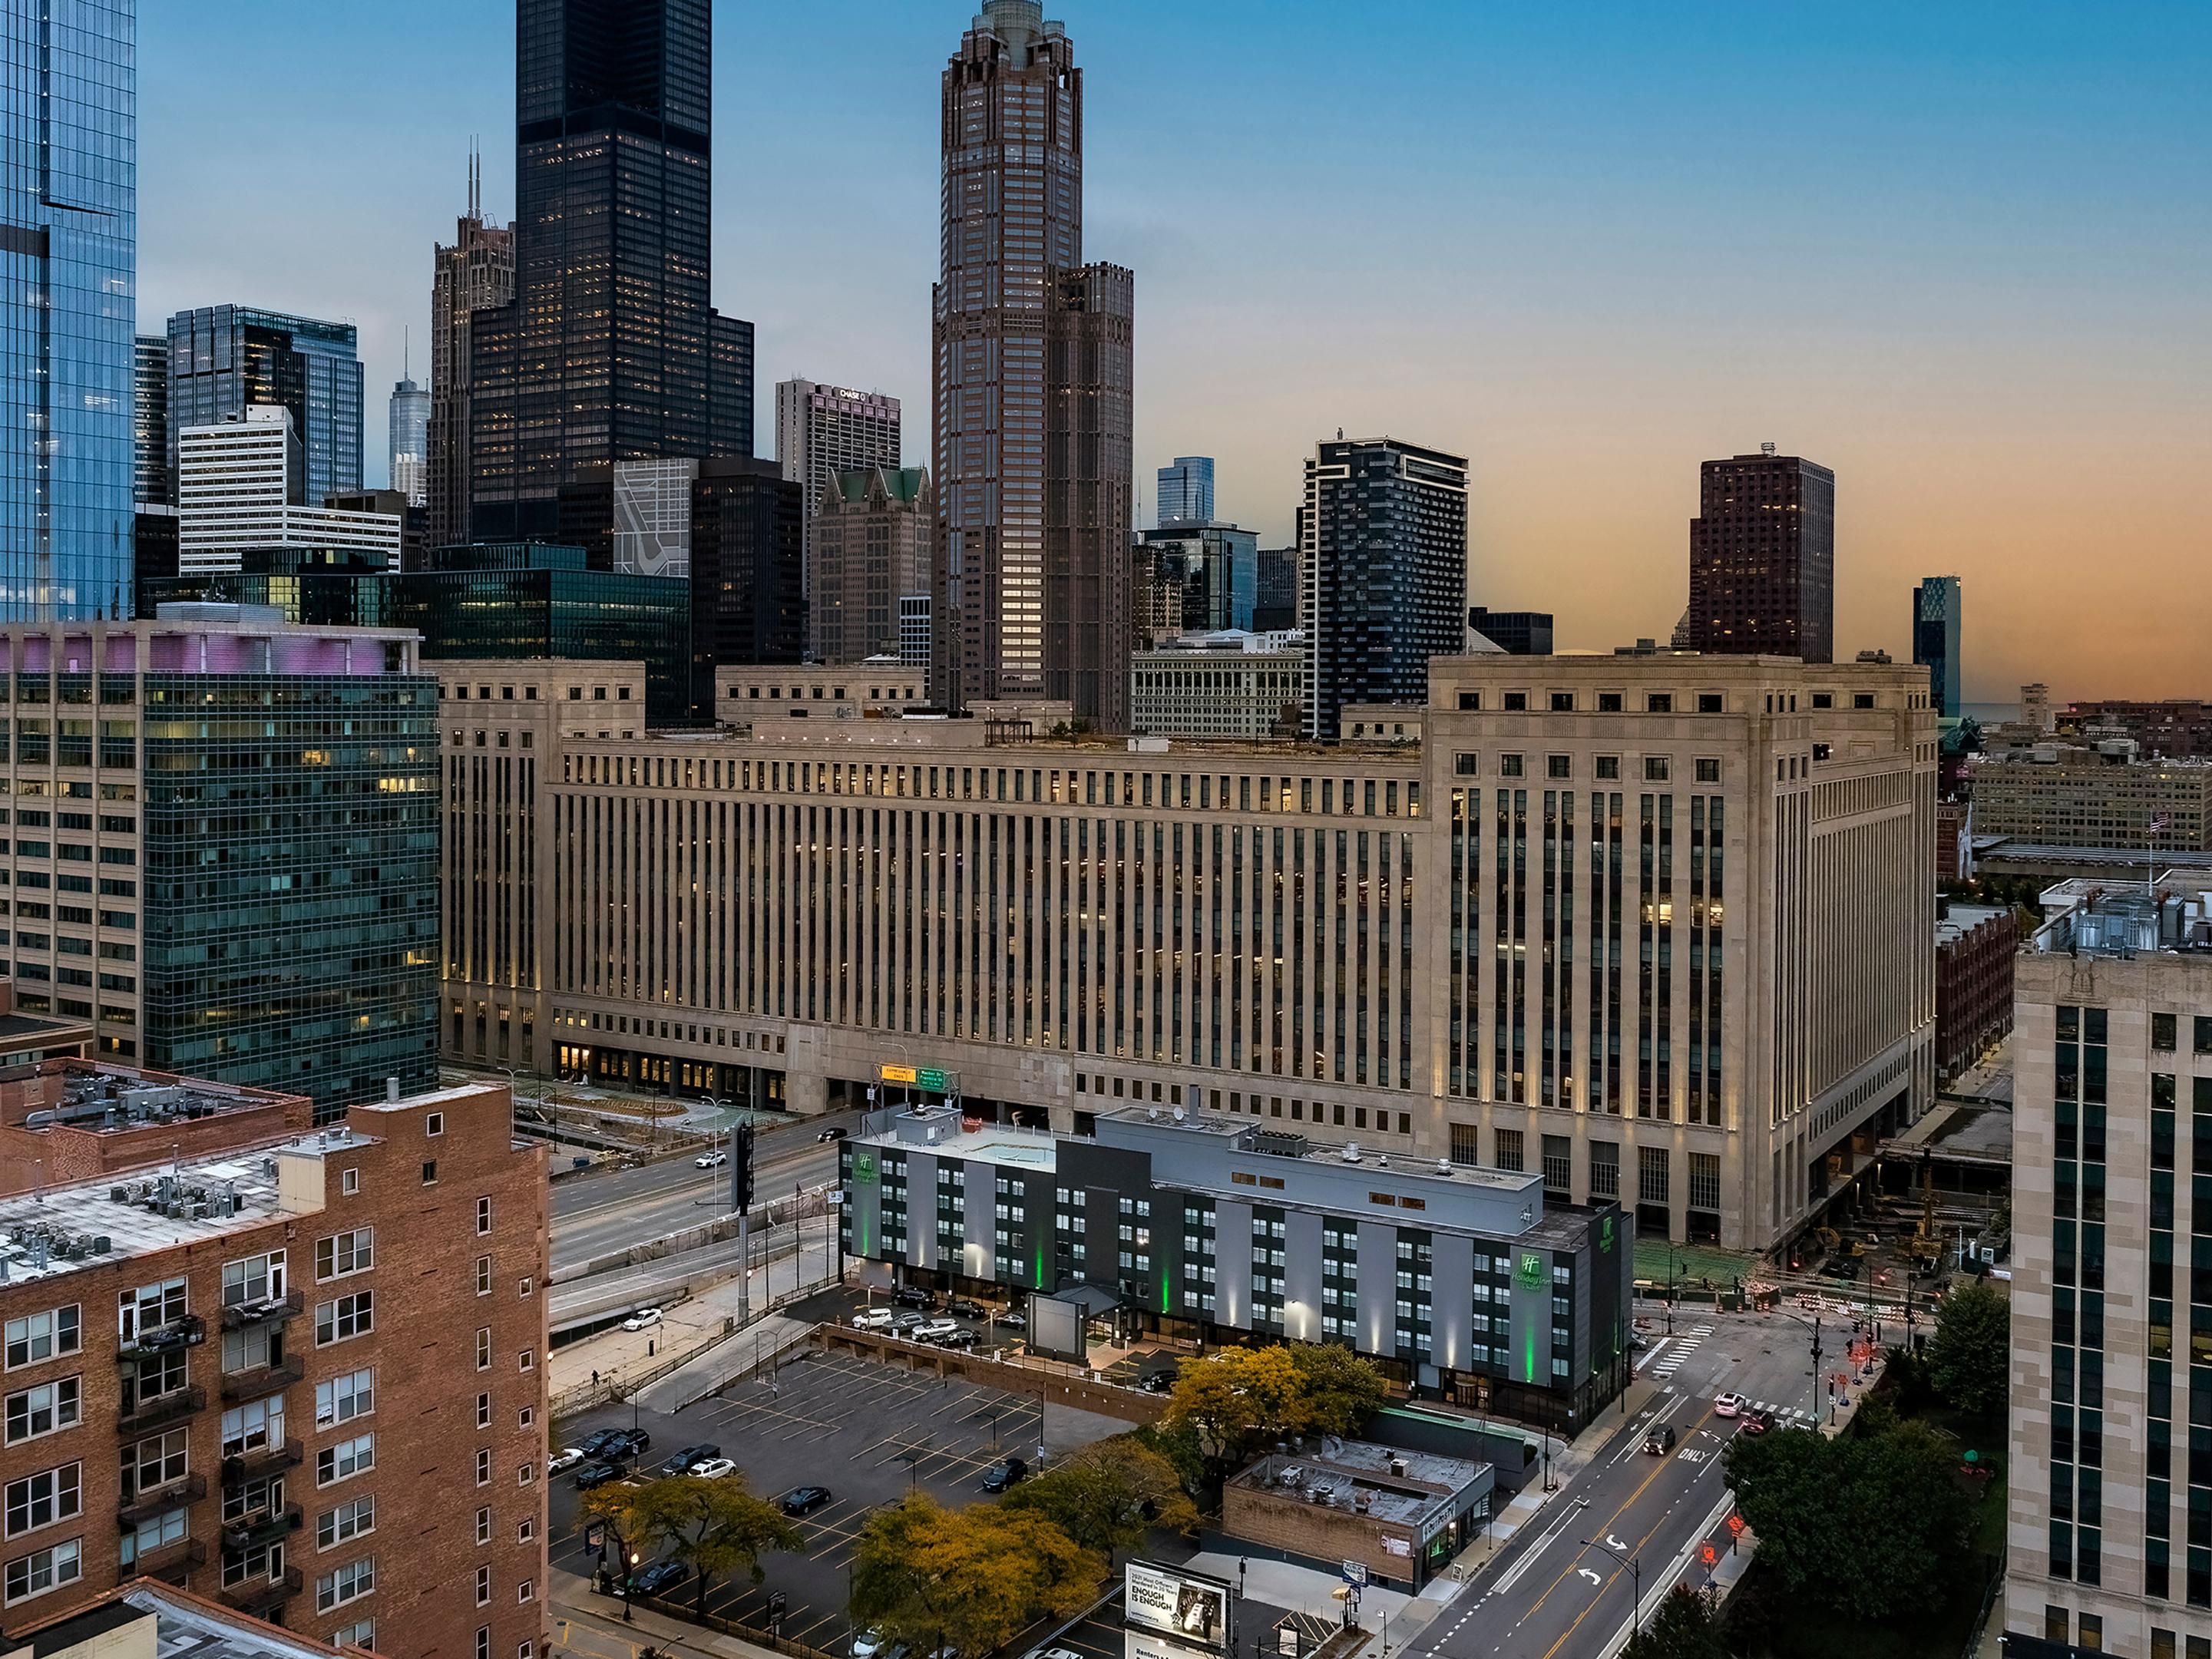 Located across the street from the Old Post Office which houses companies like Uber, Ferrara, Walgreens, Cisco and Pepsi.  The Holiday Inn Downtown Chicago proudly serves Pepsi products. 